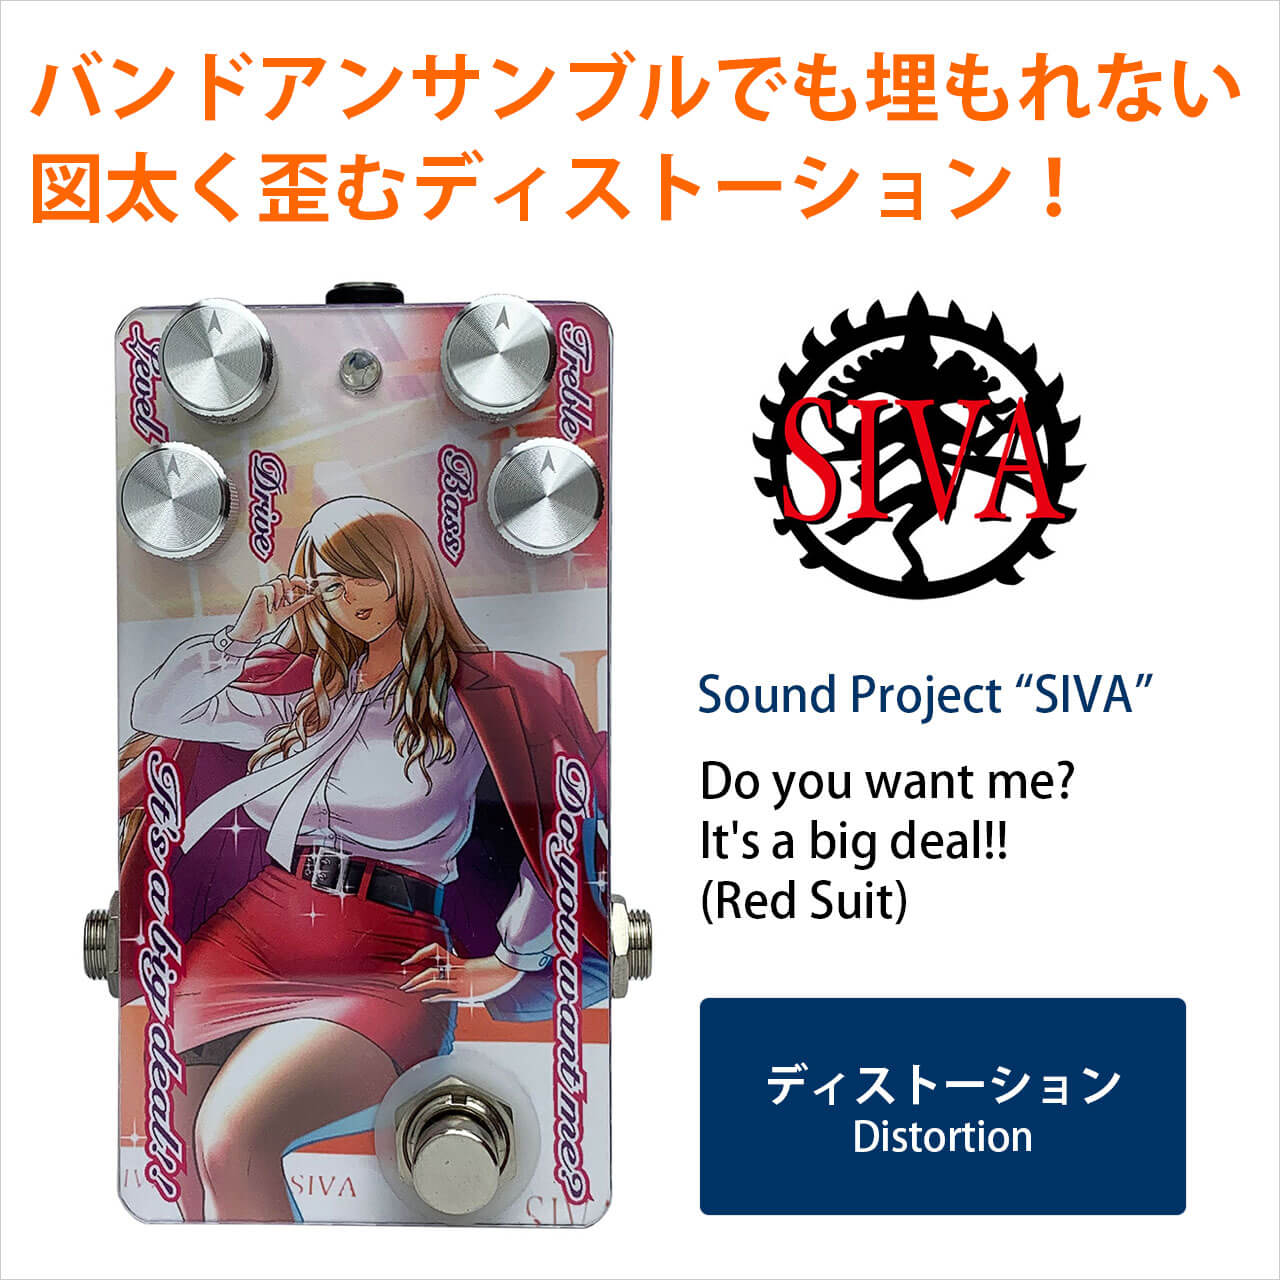 Sound Project “SIVA” / Do you want me? It's a big deal!!（Red Suit）【ディストーション】